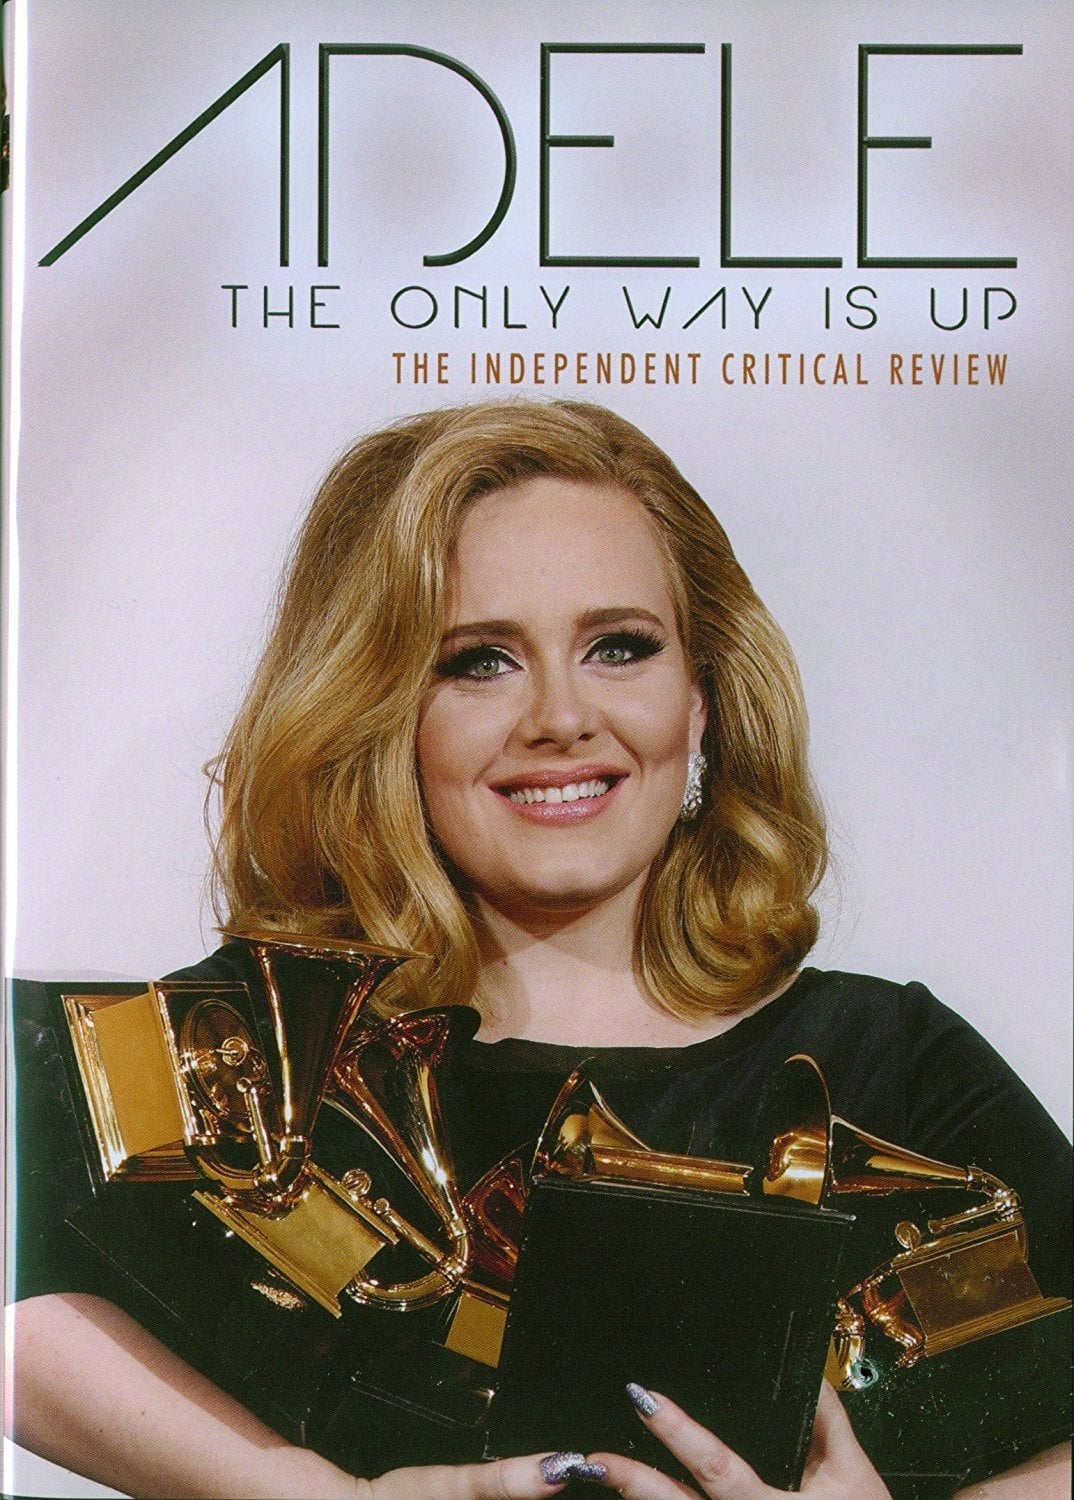 Adele The Only Way Is Up (2012)